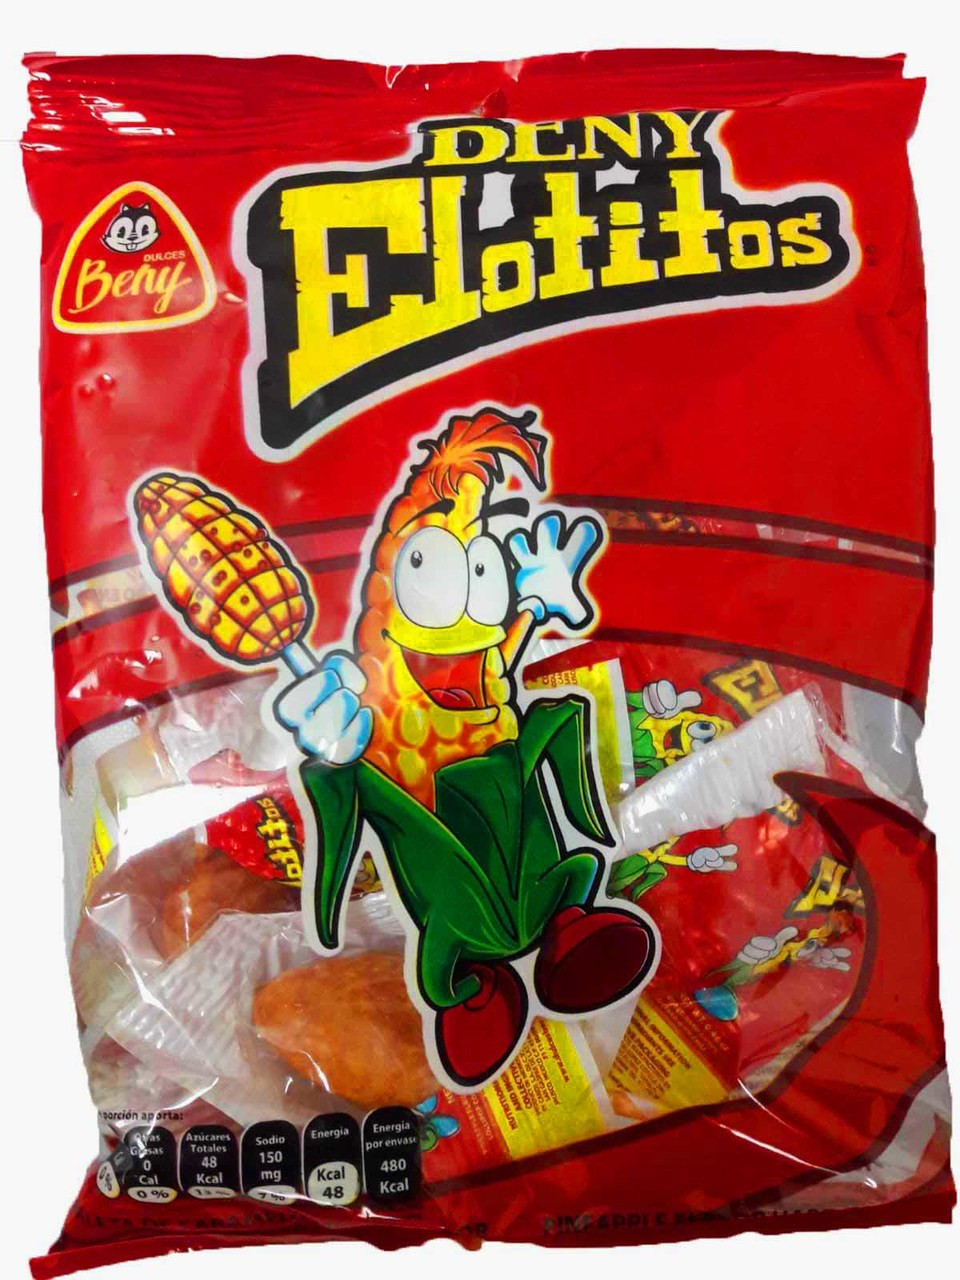 Beny Elotito is a Hard Candy Lollipop that is covered with chili and tastes like pinneapple. This Mexican Caramel Candy is shaped like corn and has chili flavoring.